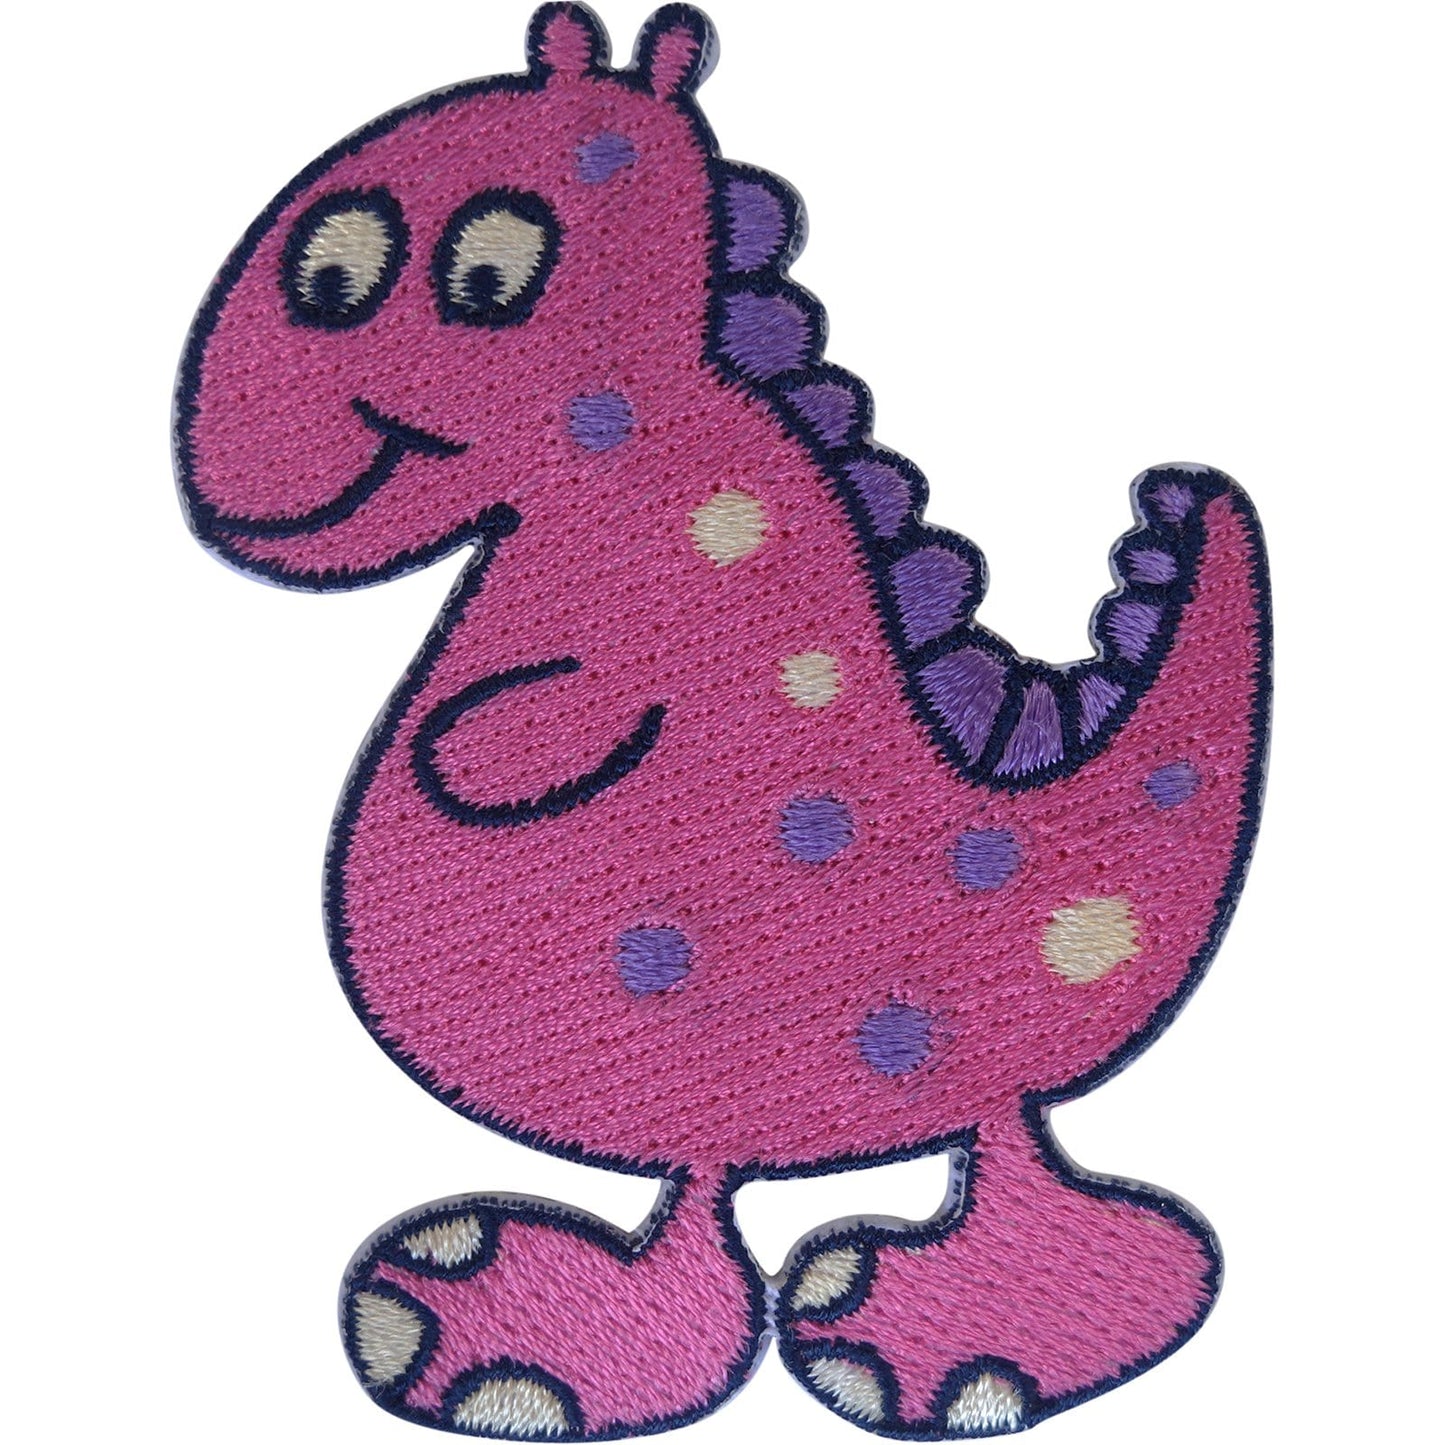 Pink Dinosaur Iron On Patch Sew On Crafts Embroidery Applique Embroidered Badge